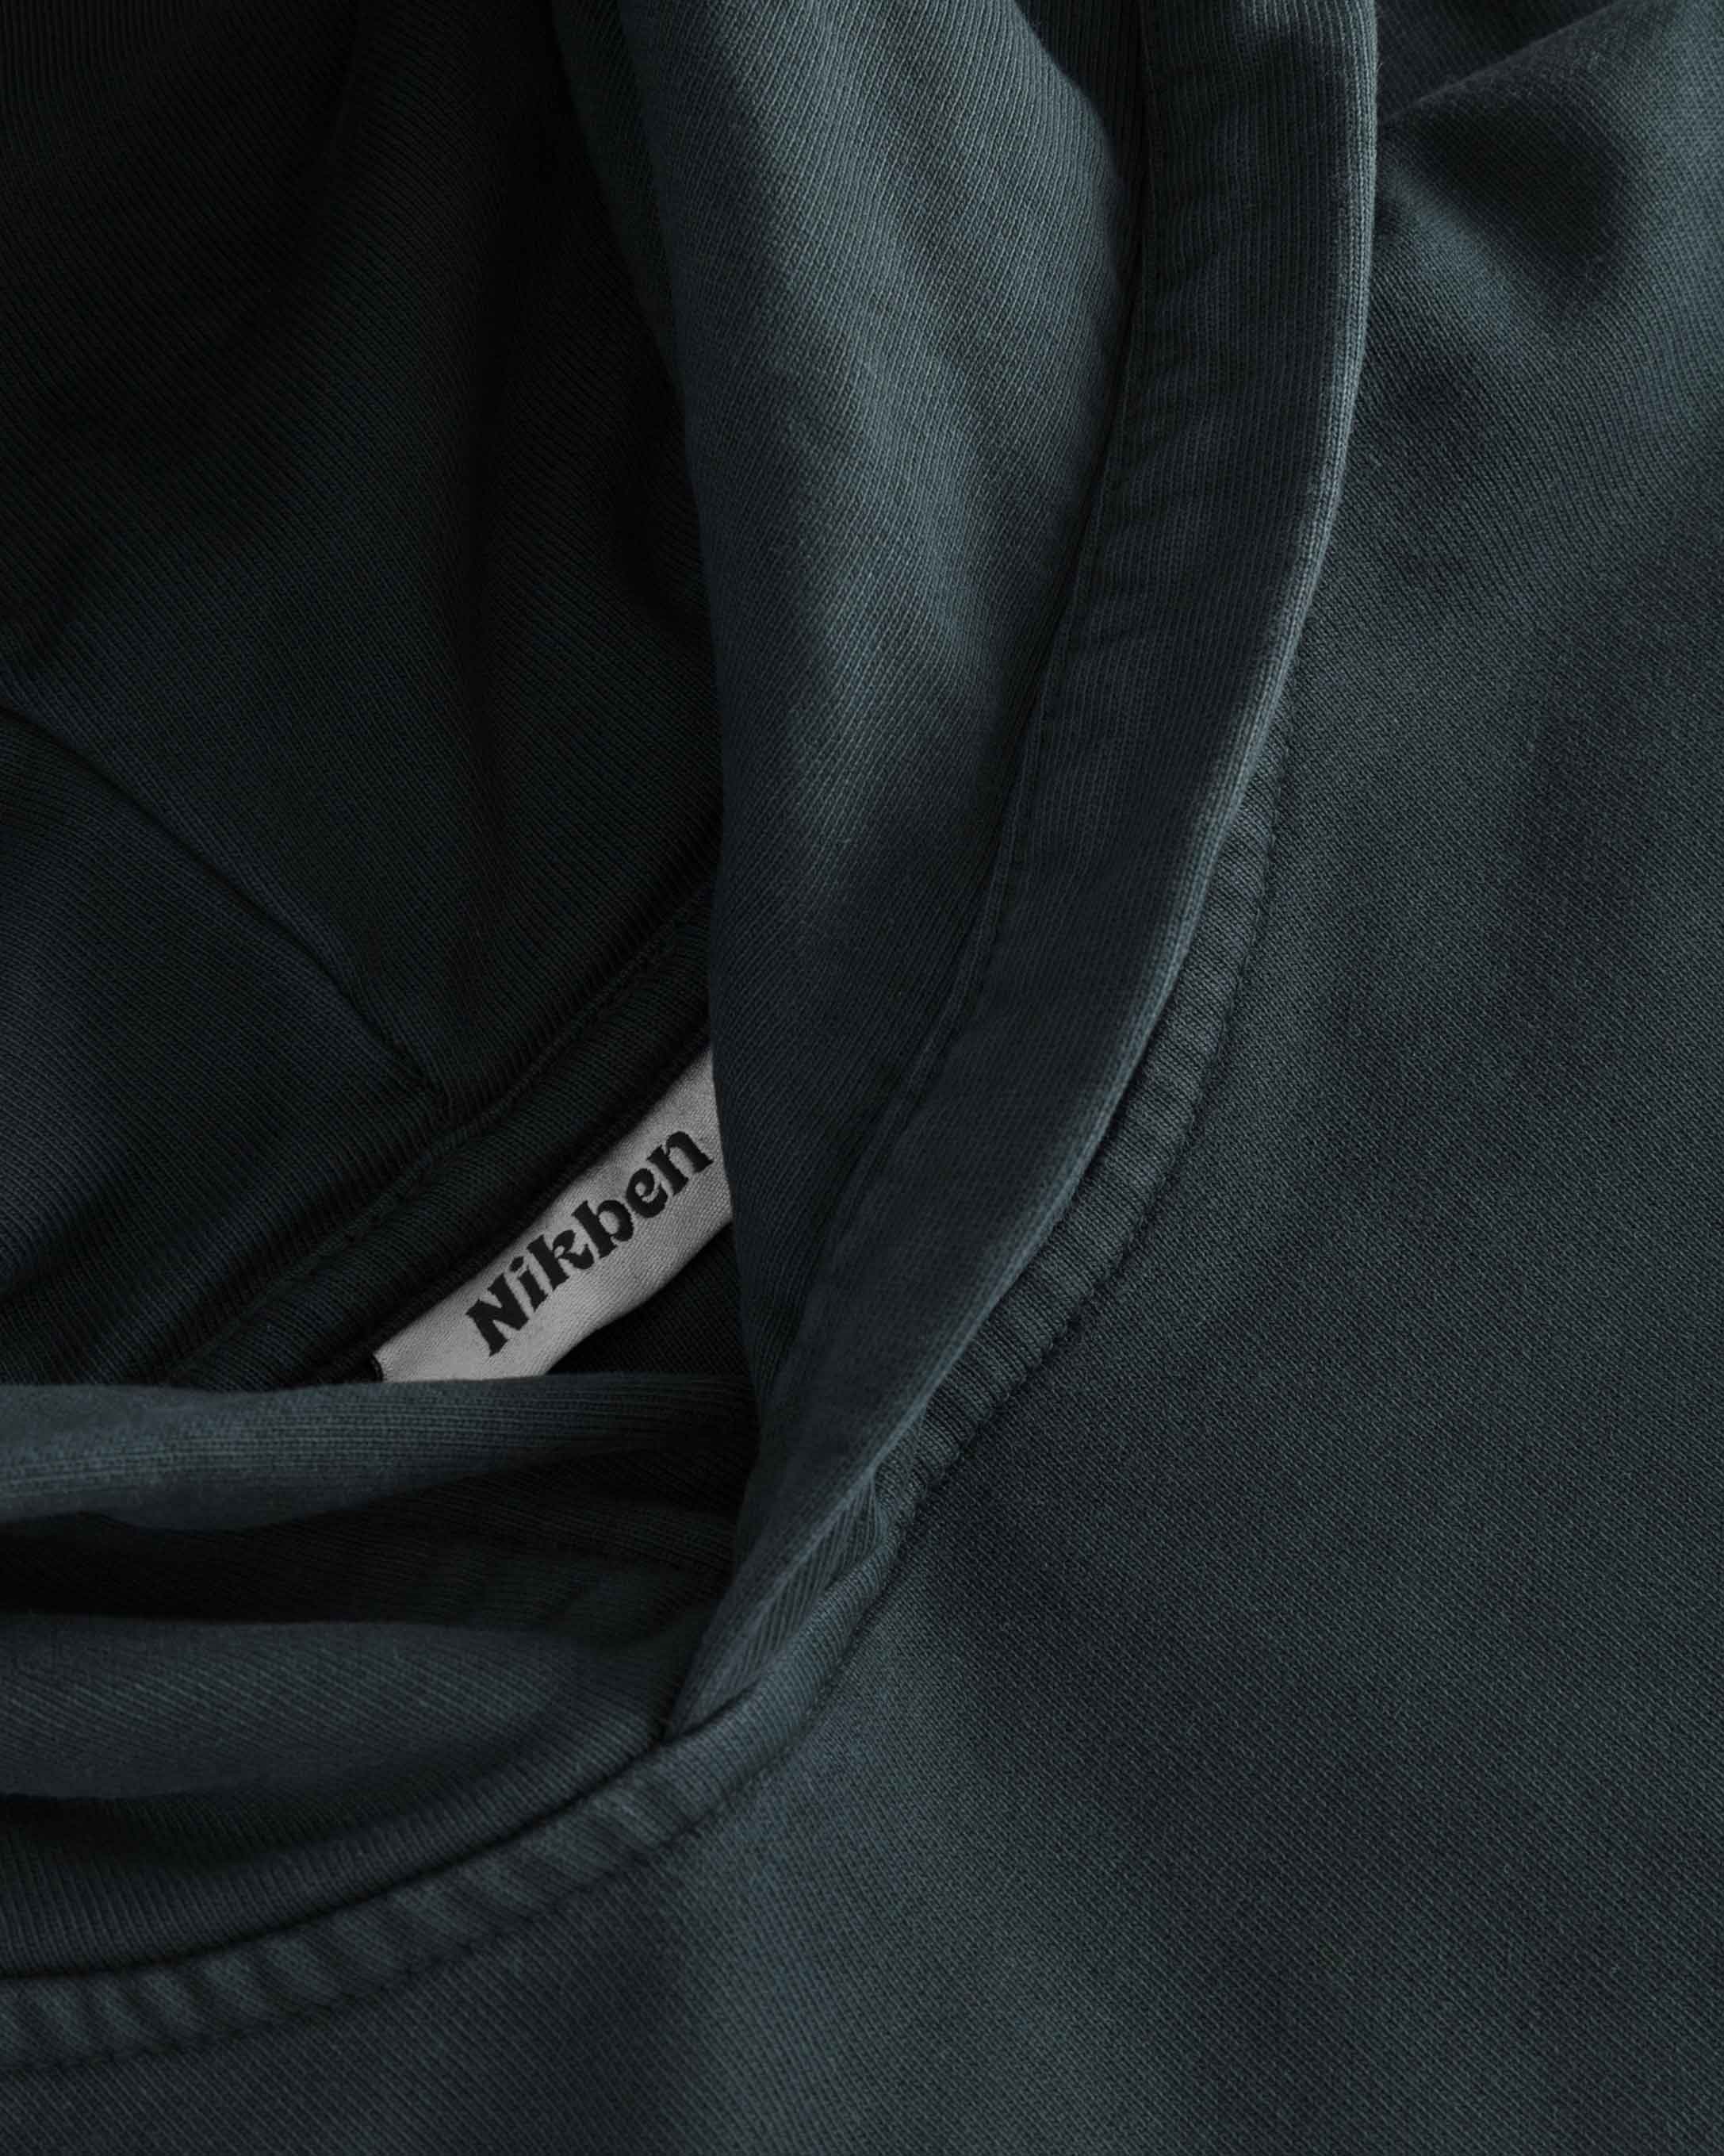 Close-up of stitchings on washed black hoodie.